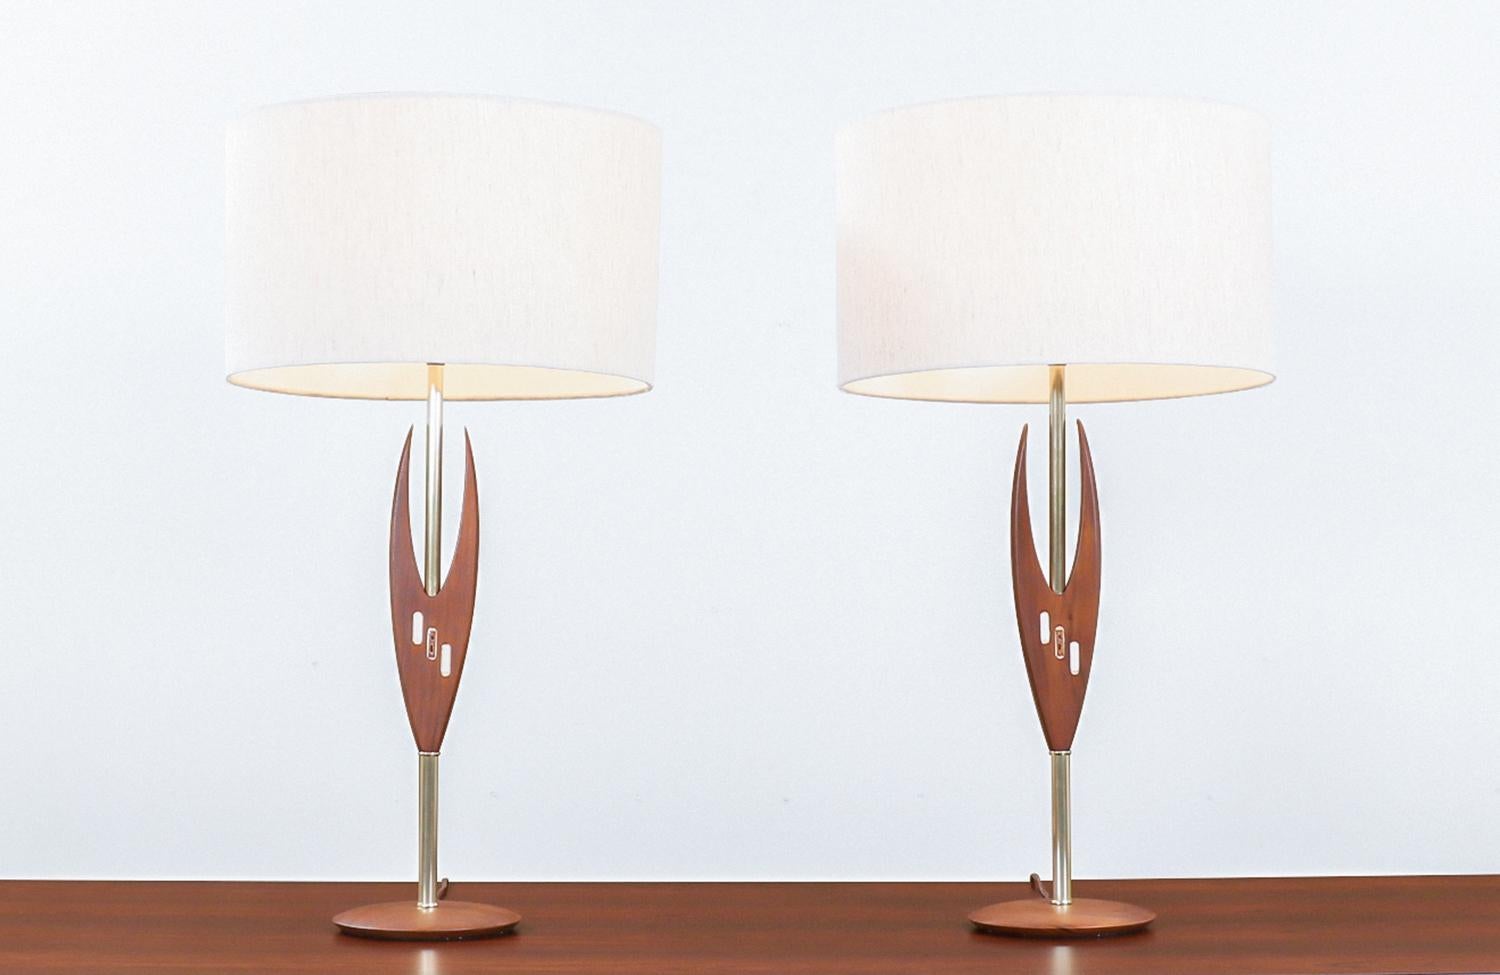 Midcentury sculpted walnut and inlaid tile table lamps.

This product is a set 